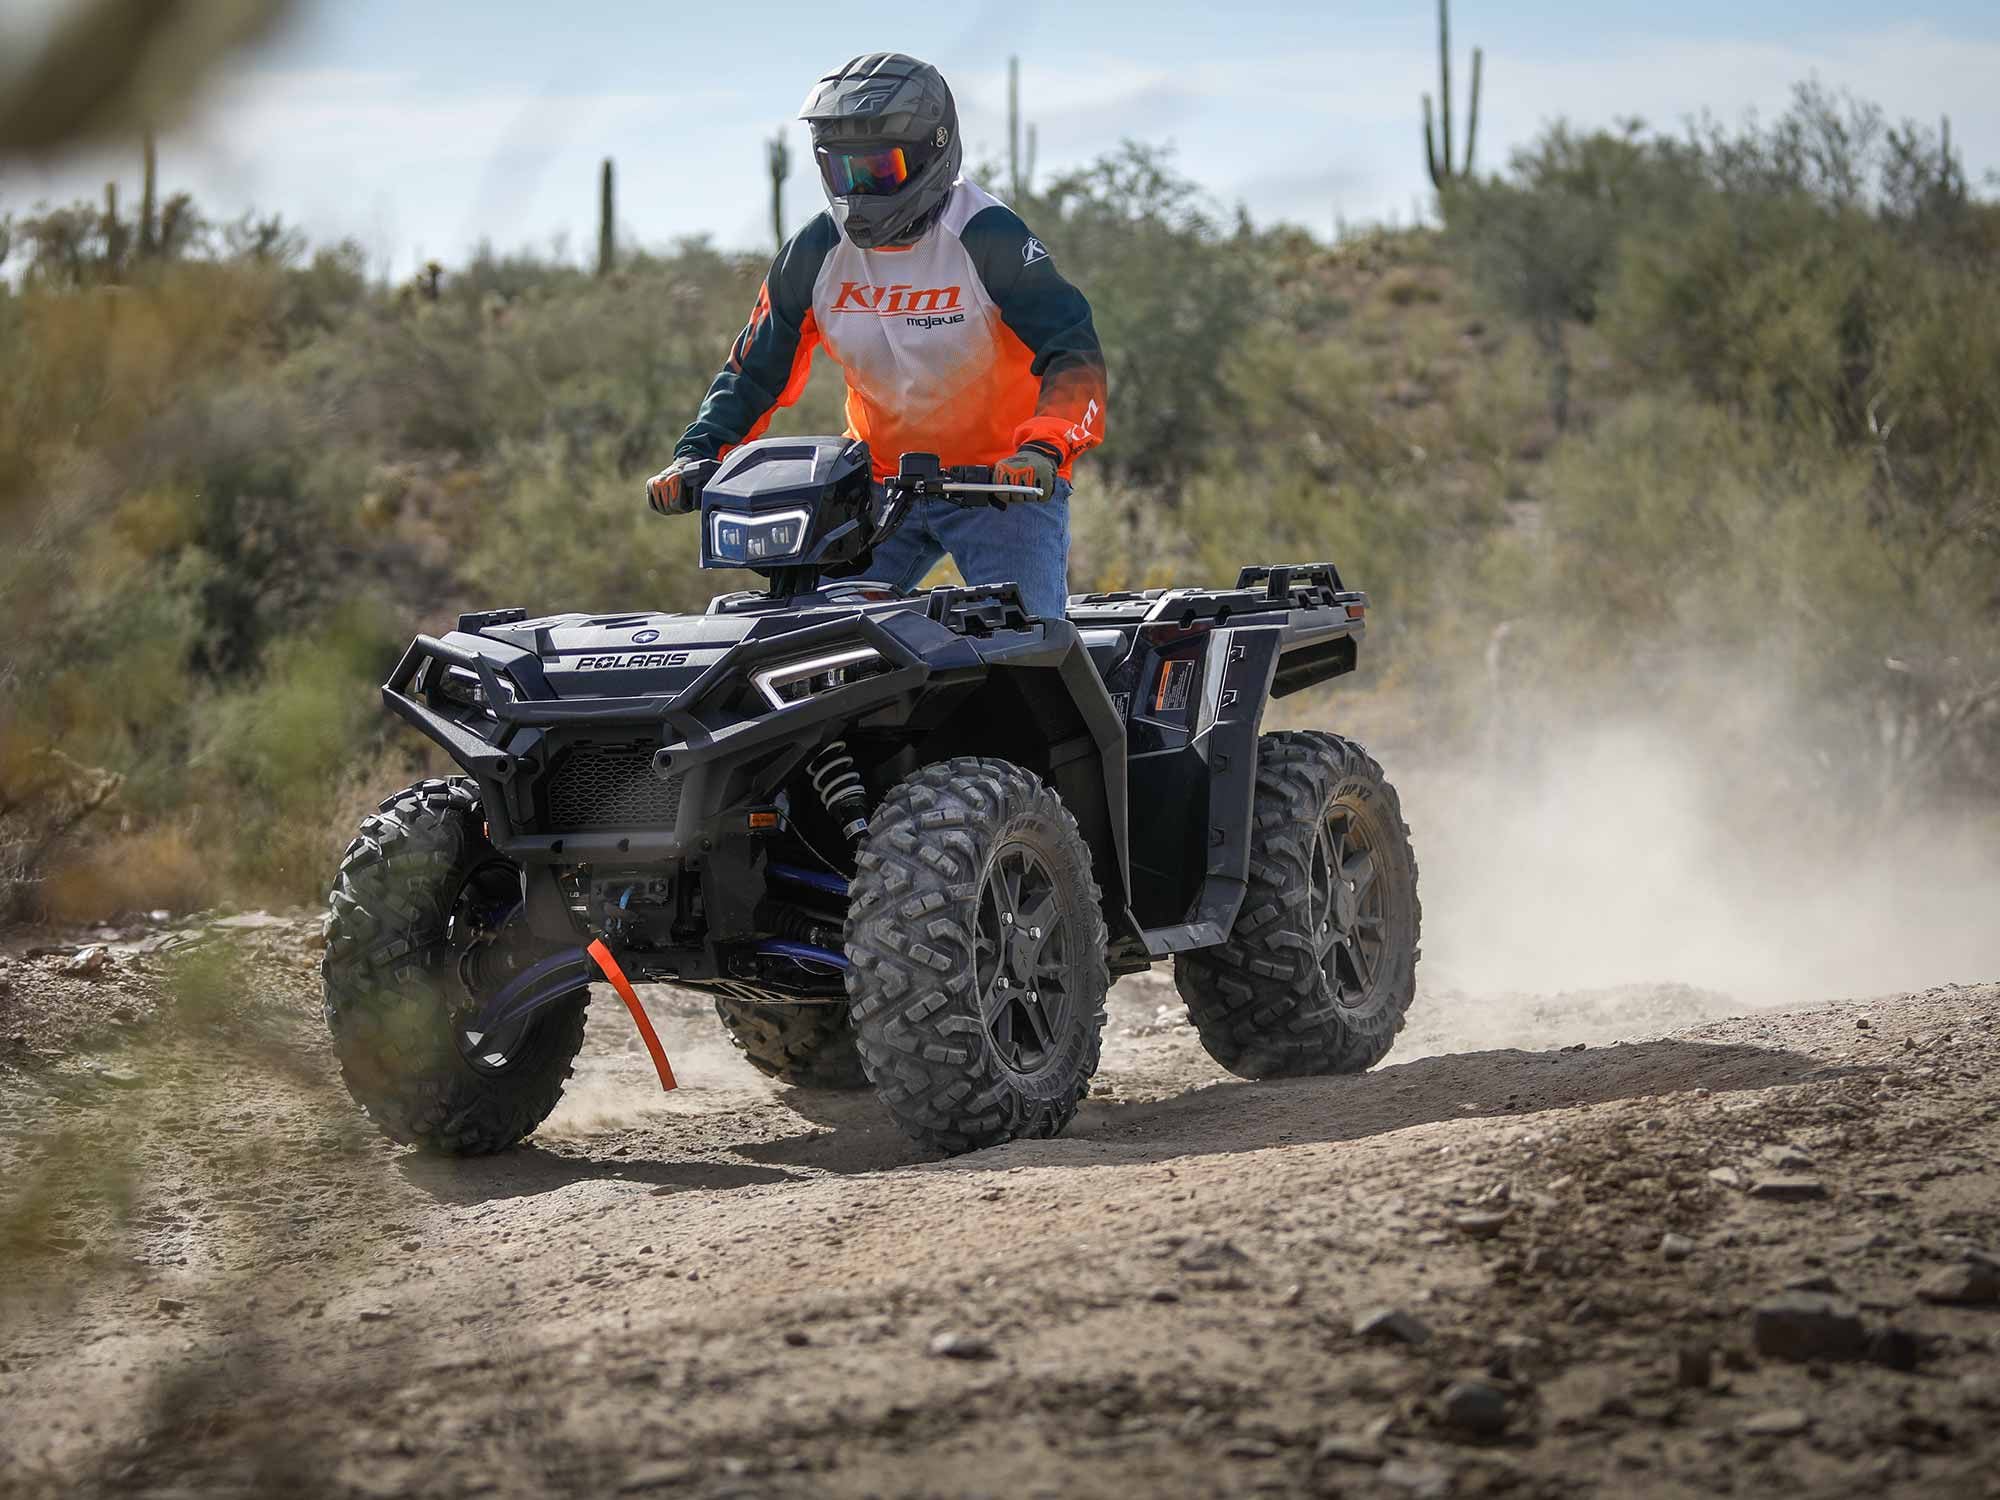 Luxury features, like a synthetic rope winch, high-clearance A-arms and an unmatched GPS/comm system, are just a few of the highlights of the 2022 Polaris Sportsman XP 1000 Ride Command Edition.